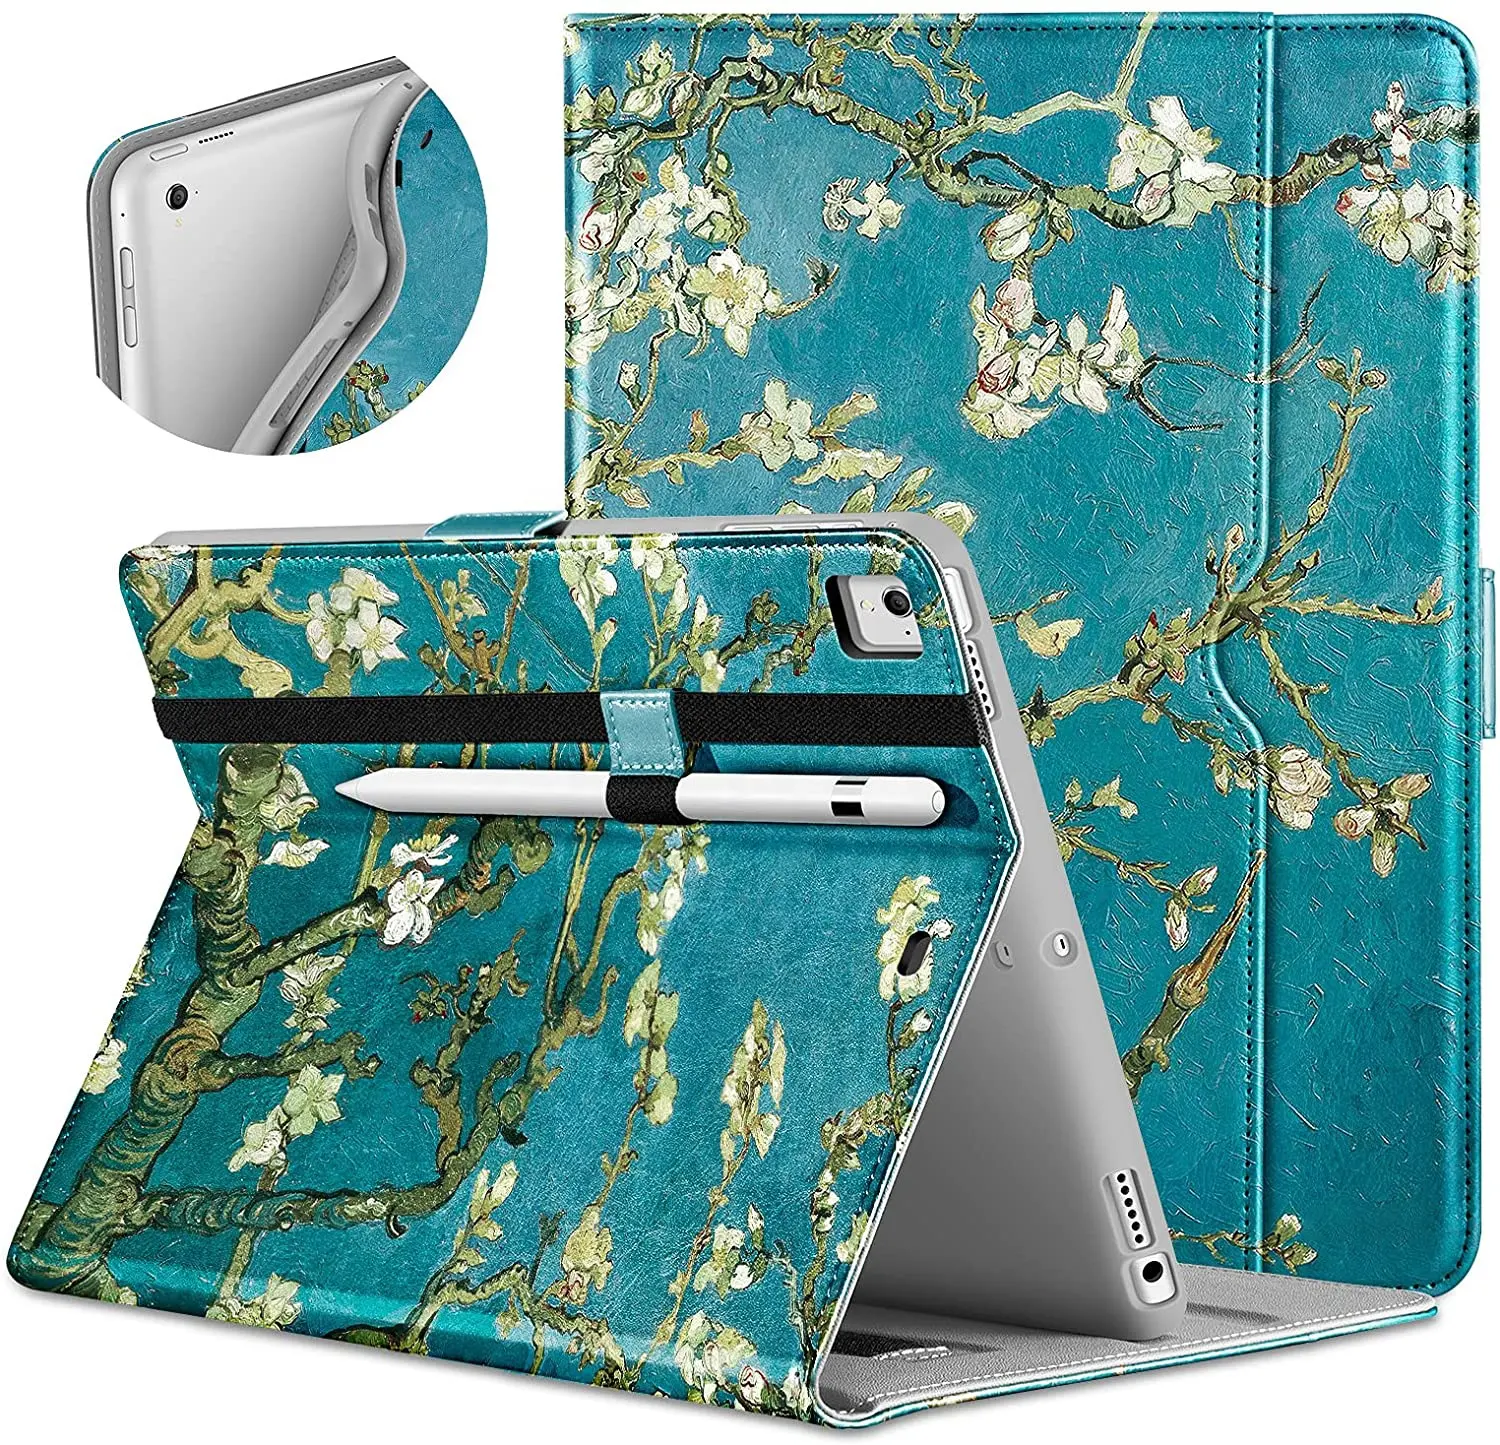 Auto Sleep Wake With Pencil Holder PU Leather Smart Cover For iPad 9.7 6th 5th Generation Case